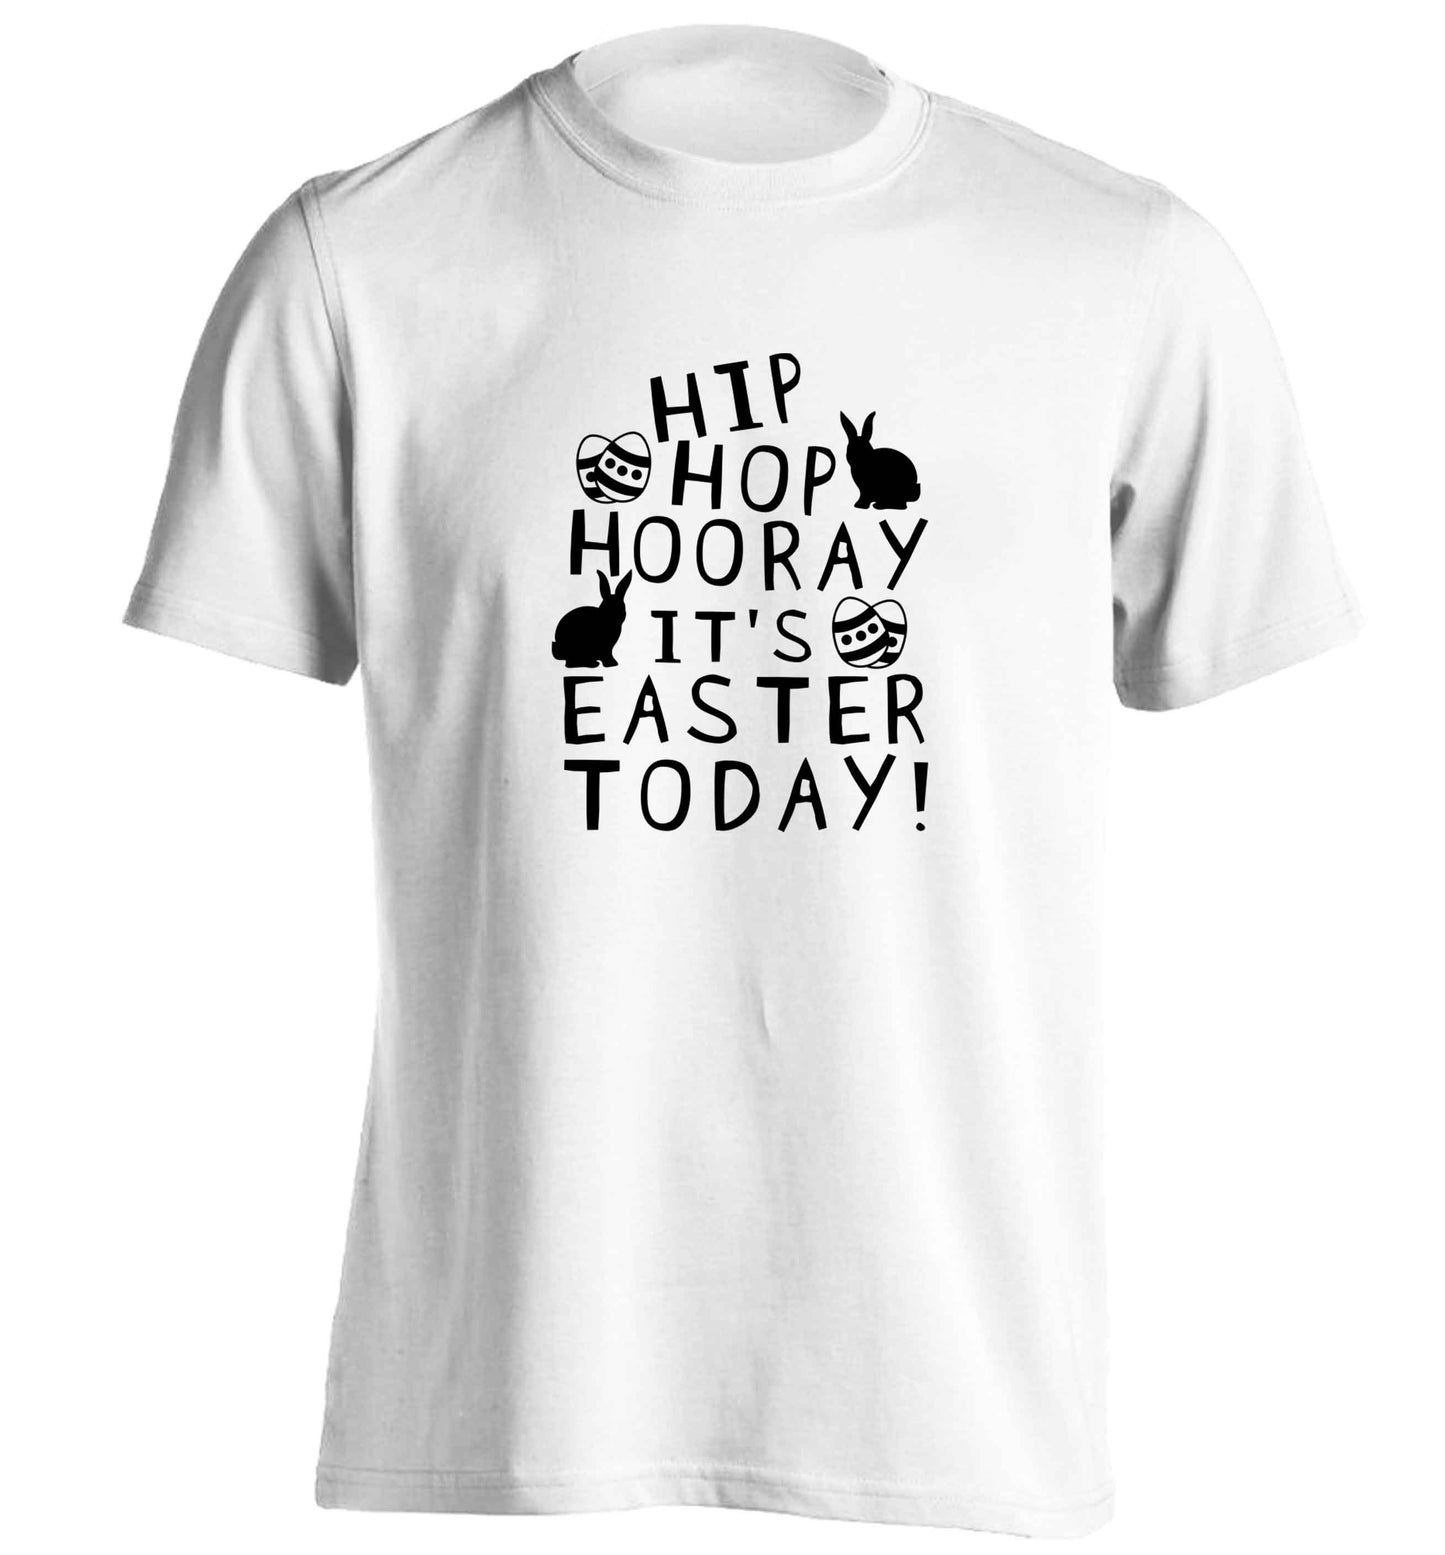 Hip hip hooray it's Easter today! adults unisex white Tshirt 2XL